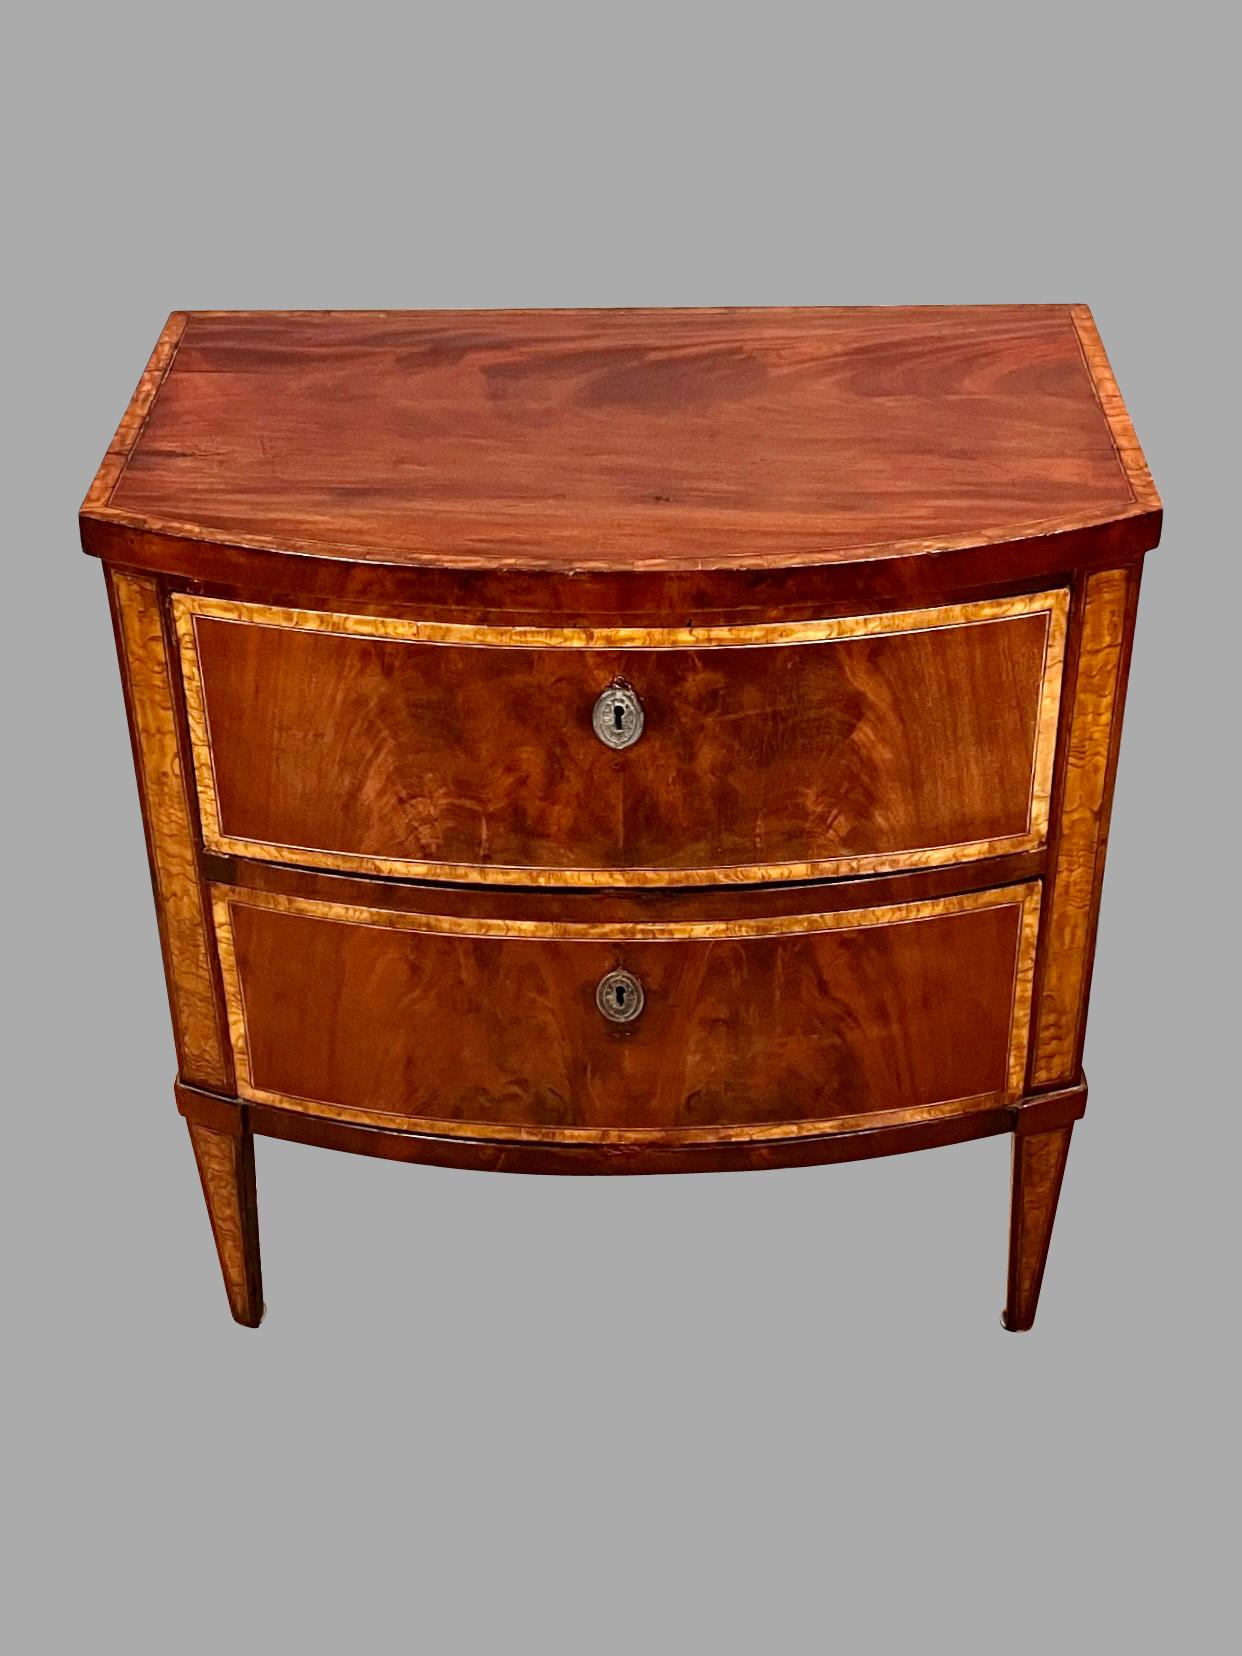 A handsome English Hepplewhite inlaid mahogany 2 drawer bow front commode of desirable small size, the overhanging top crossbanded in burl elm over 2 similarly inlaid drawers all supported on square tapered legs. This is a useful and versatile piece